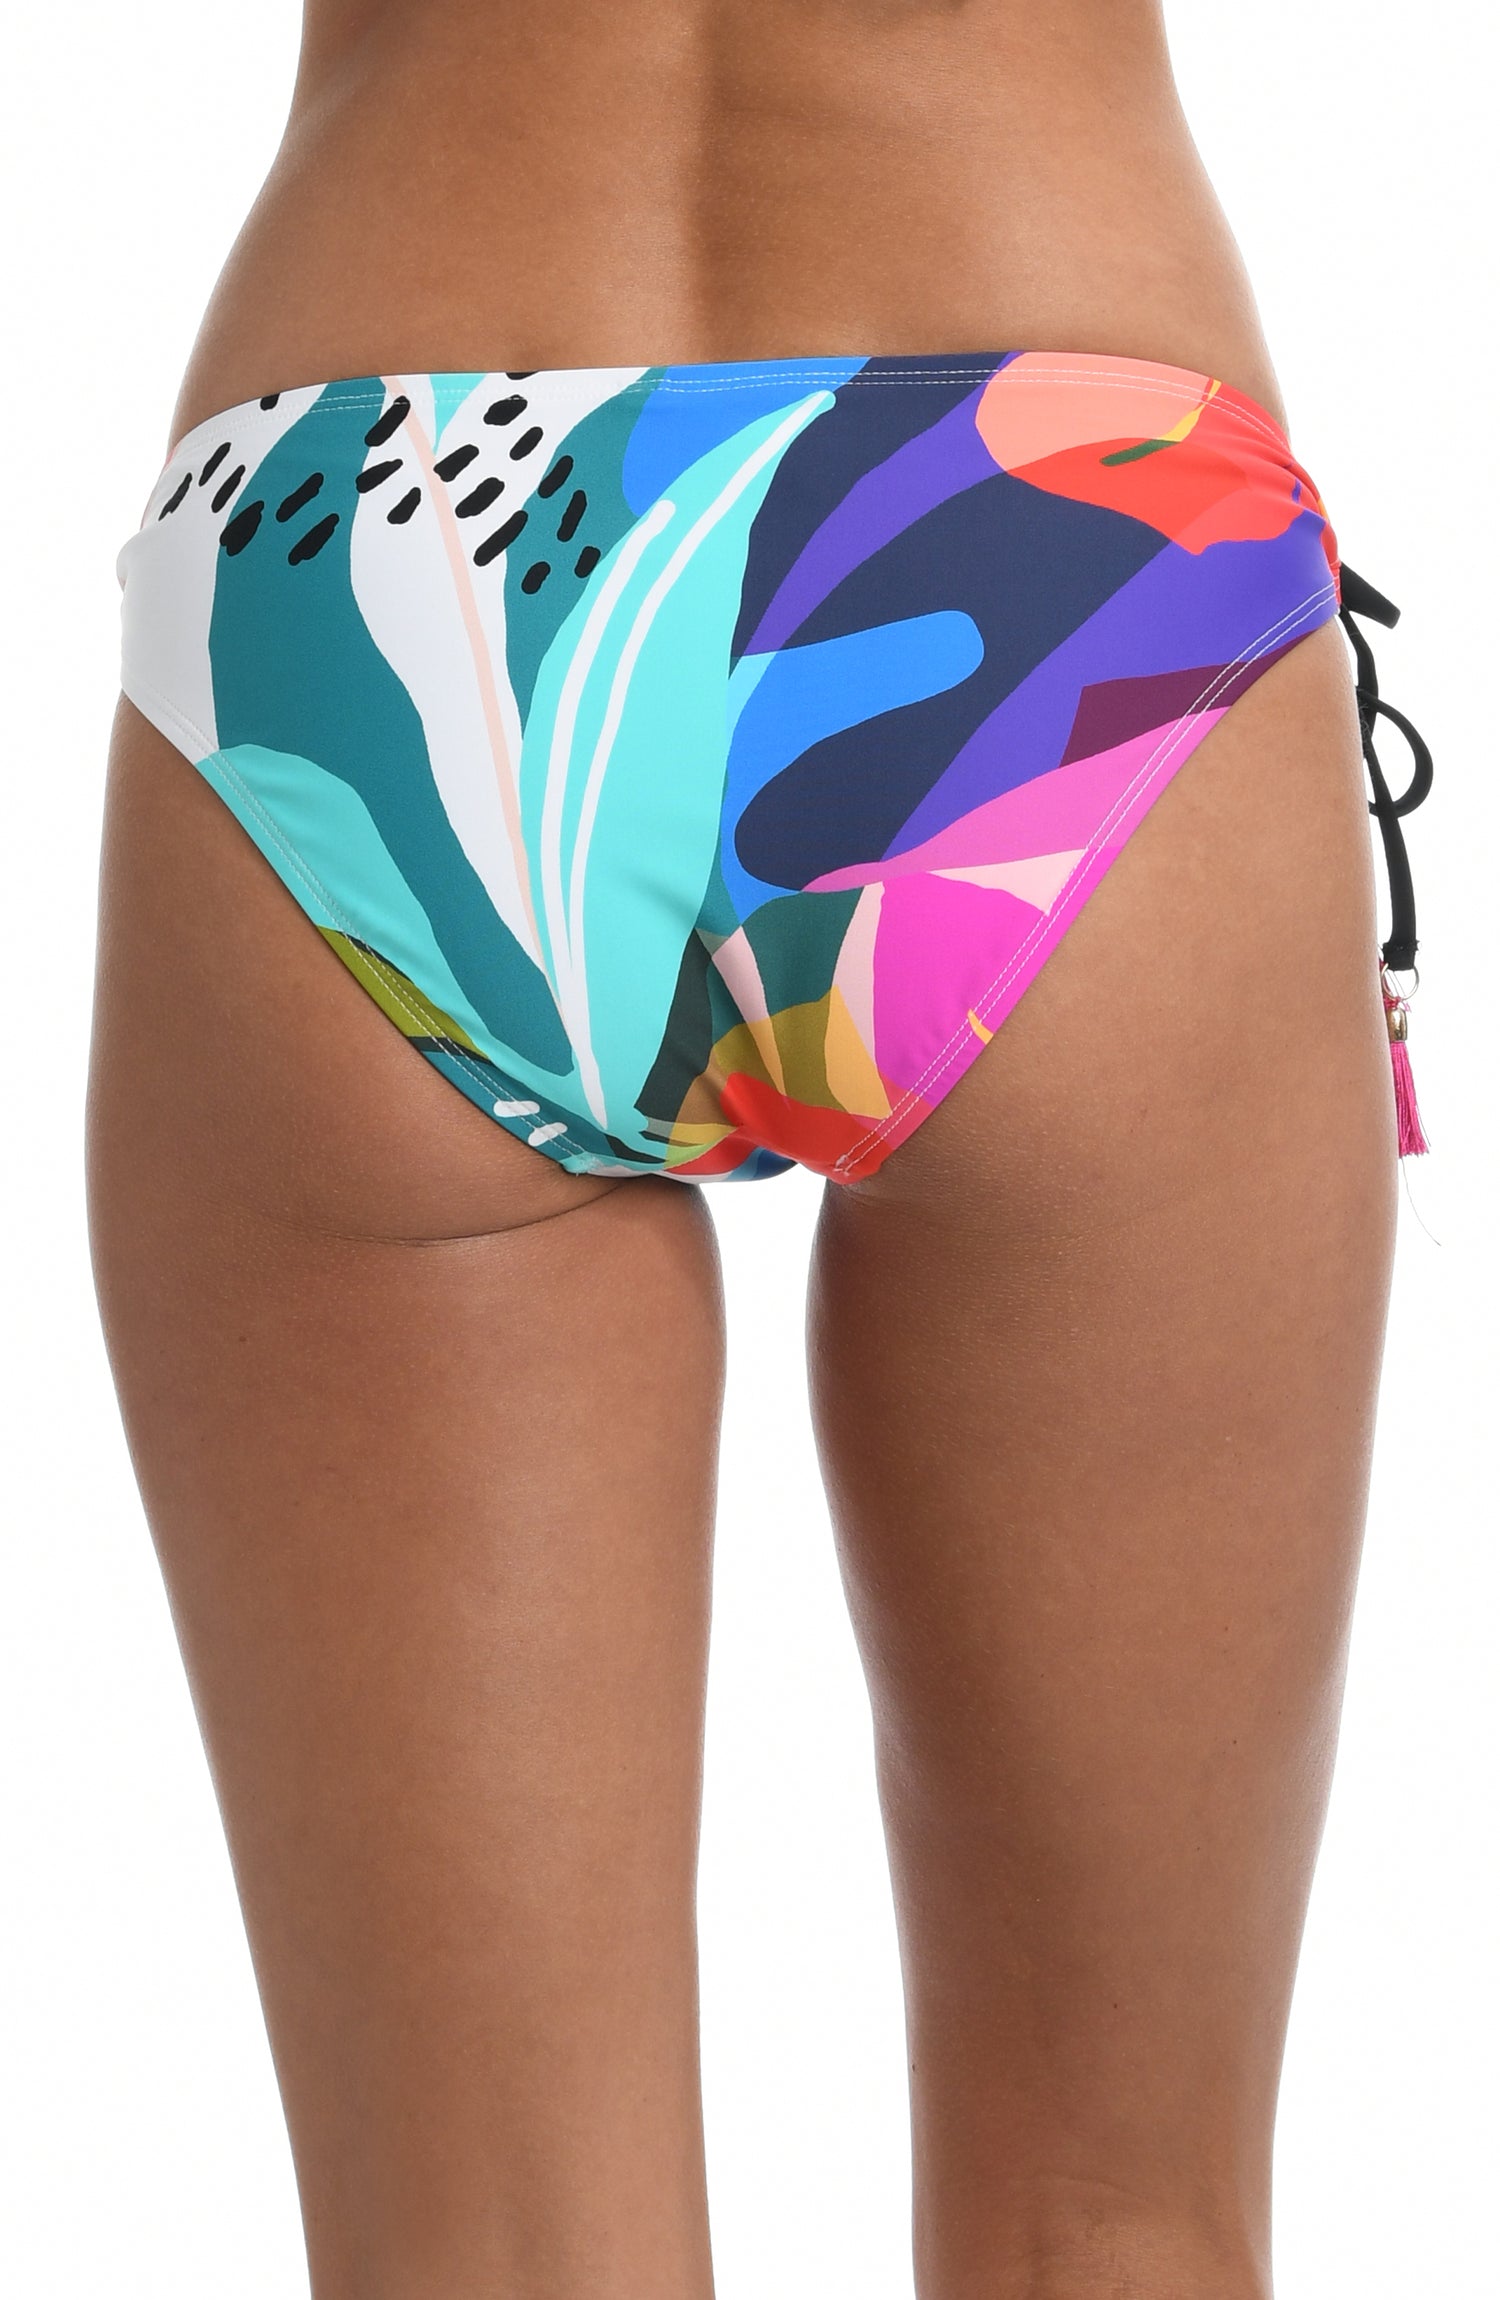 Eclectic Shore Side Tie Hipster Bottom - FINAL SALE